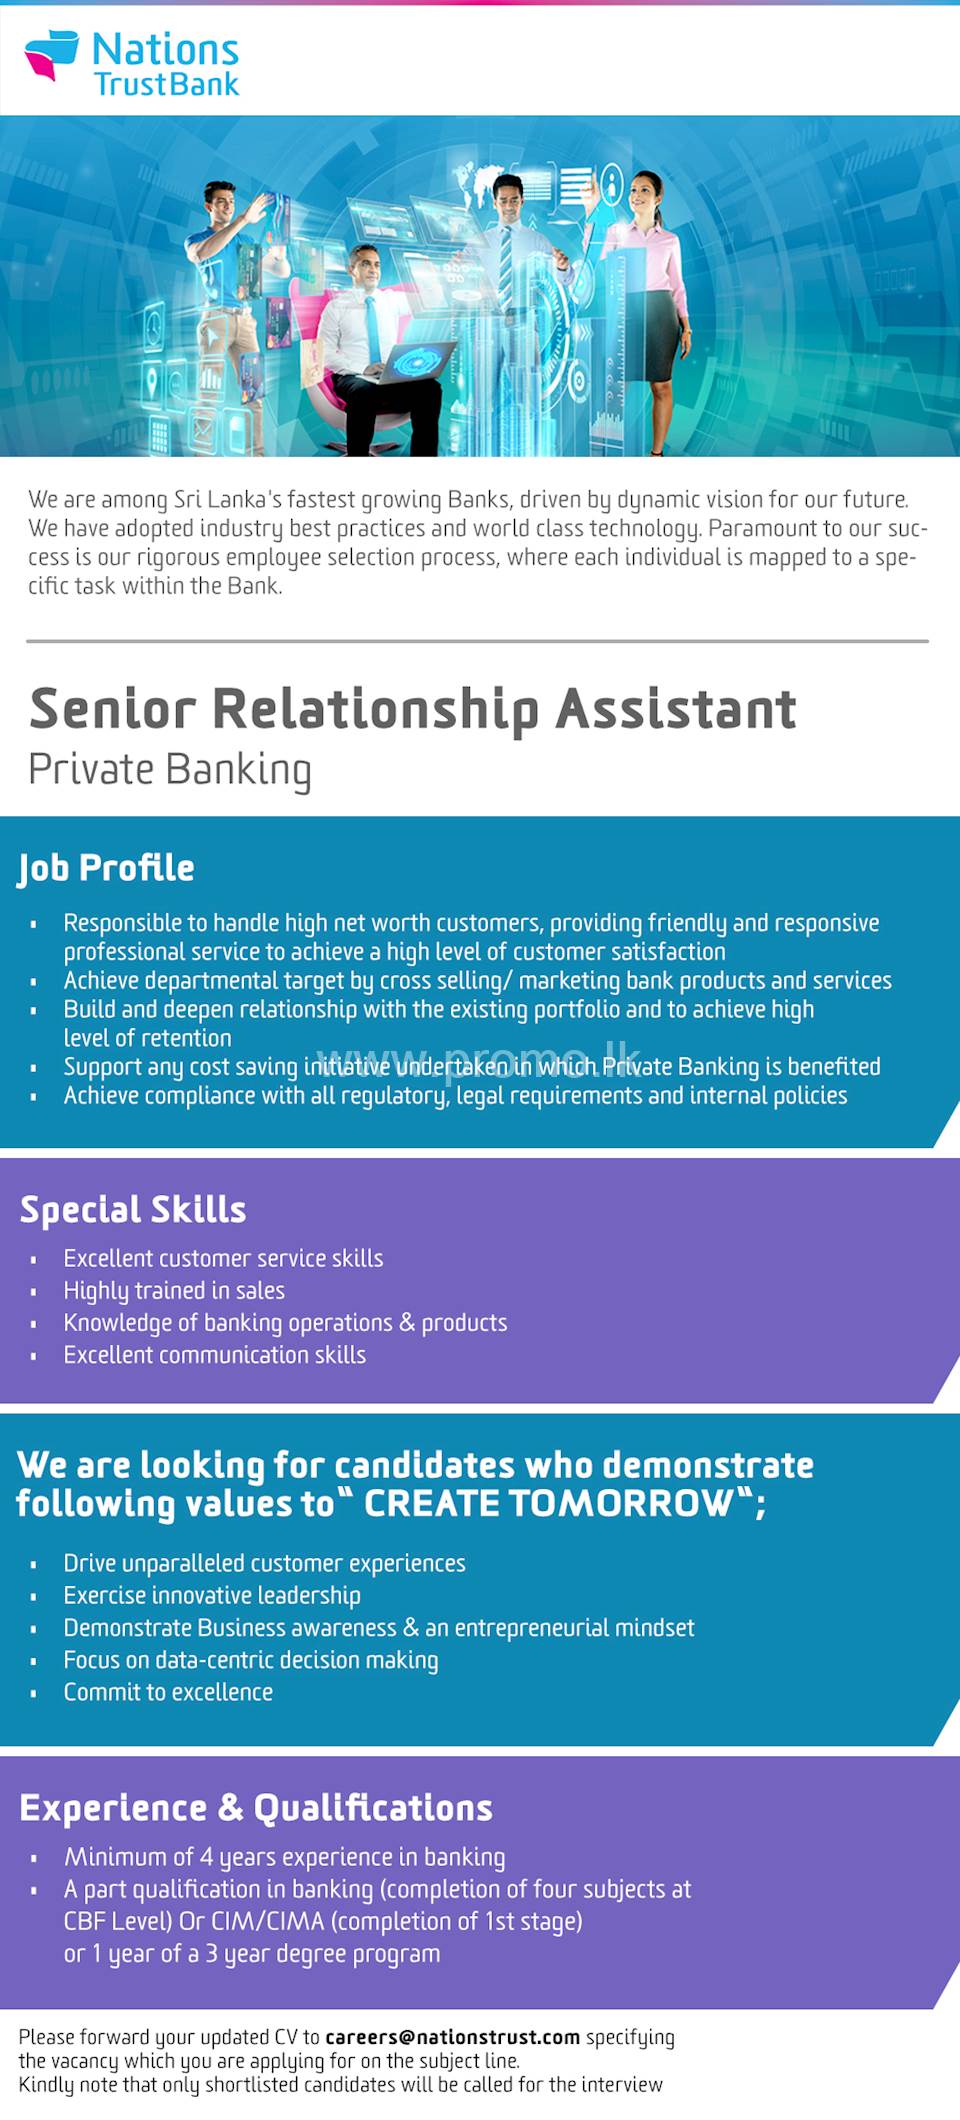 Senior Relationship Assistant - Private Banking